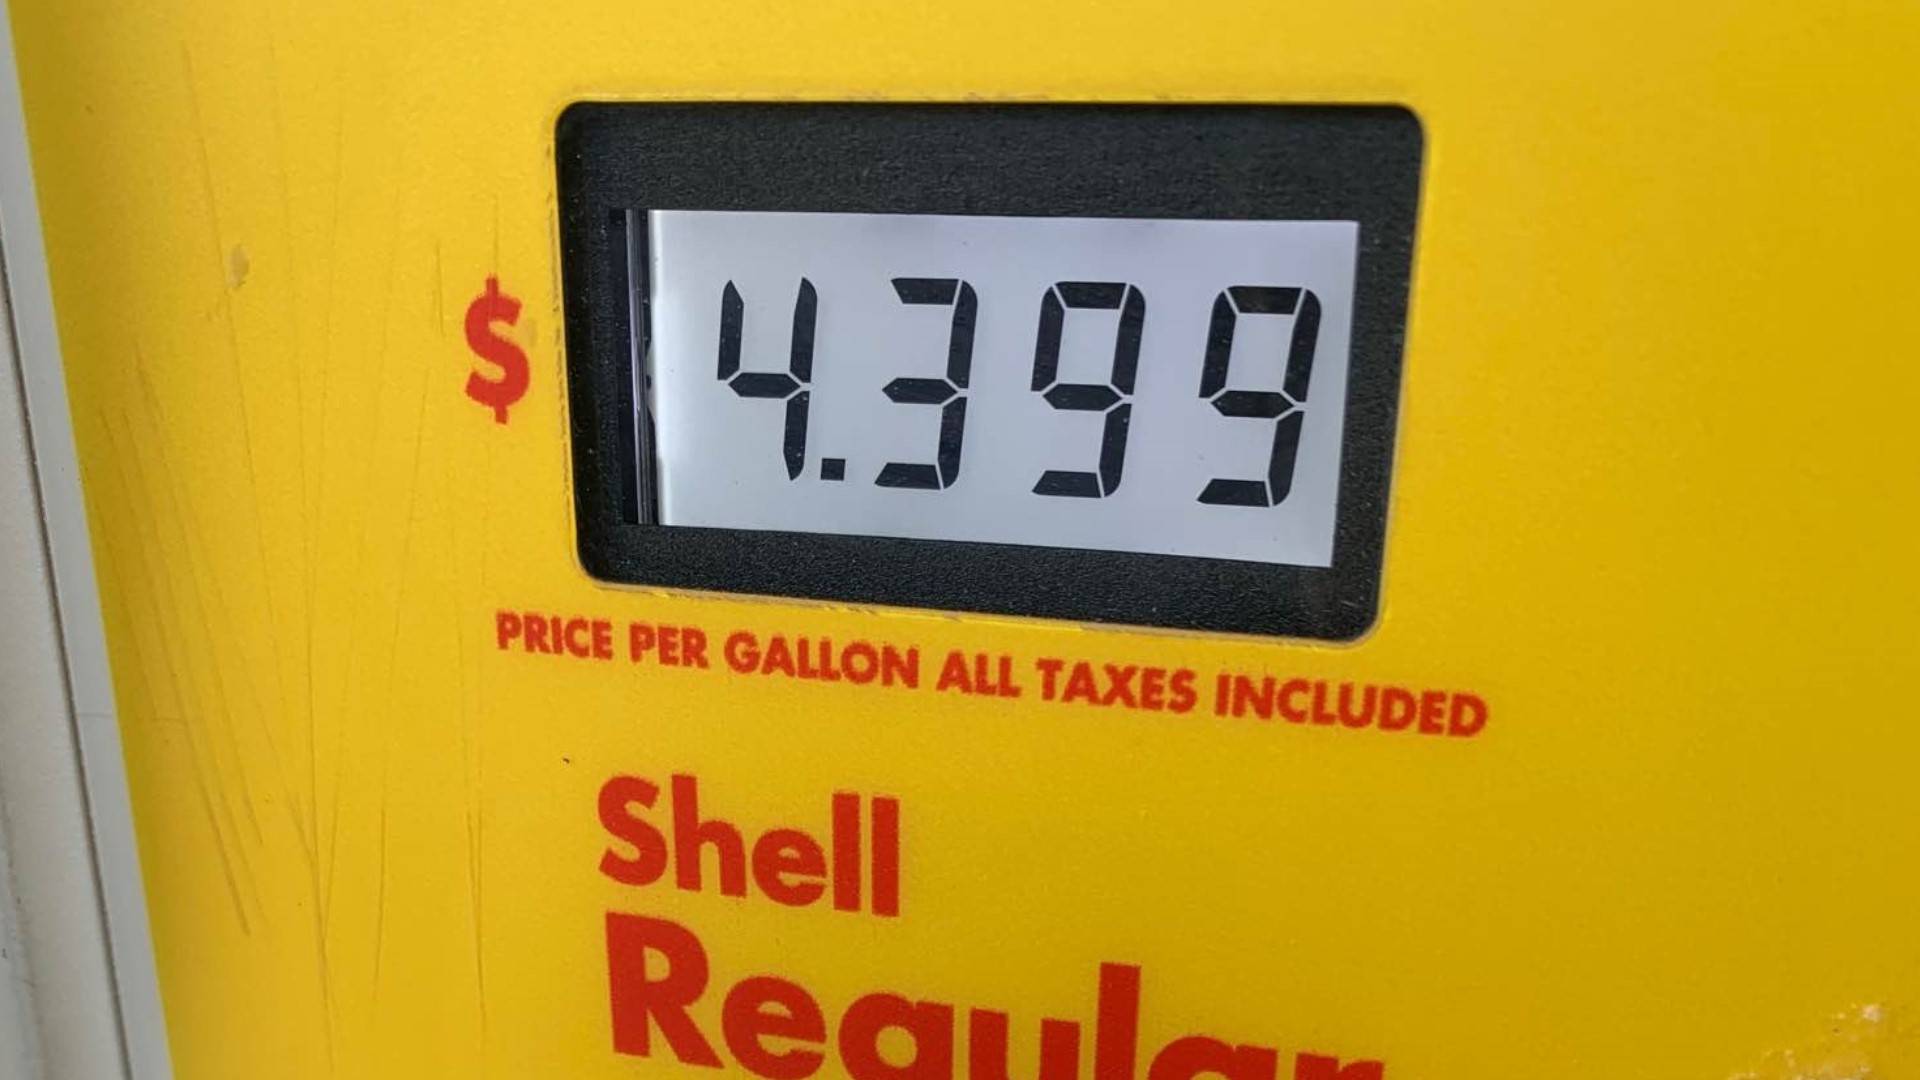 Currently, Hoosiers pay 74.5 cents per gallon in state and federal taxes when they fill up.